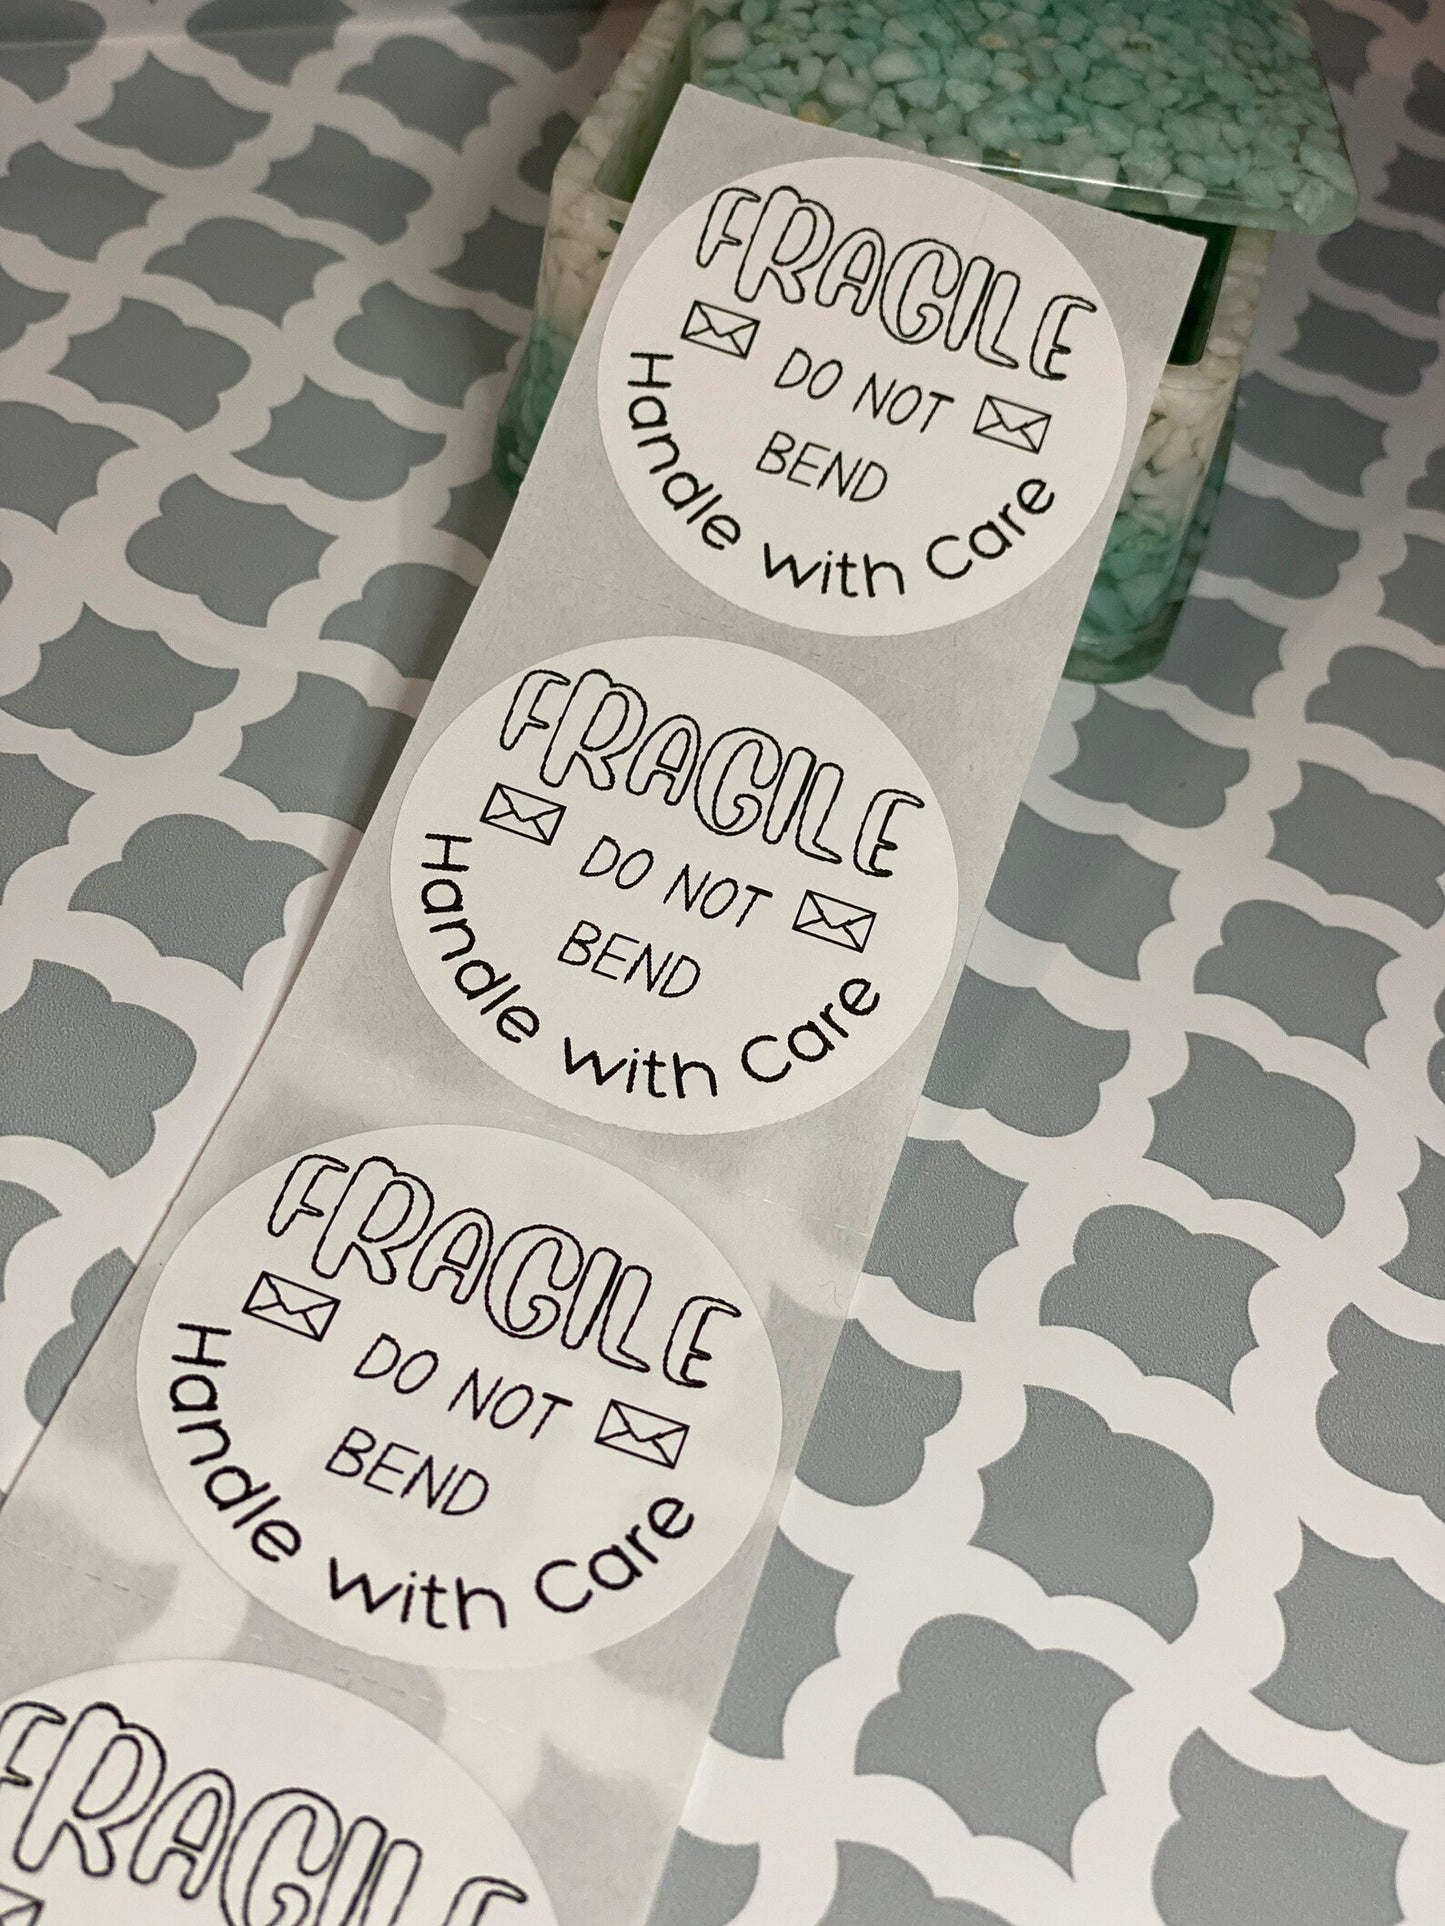 Fragile Do Not Bend Thermal Printed Stickers